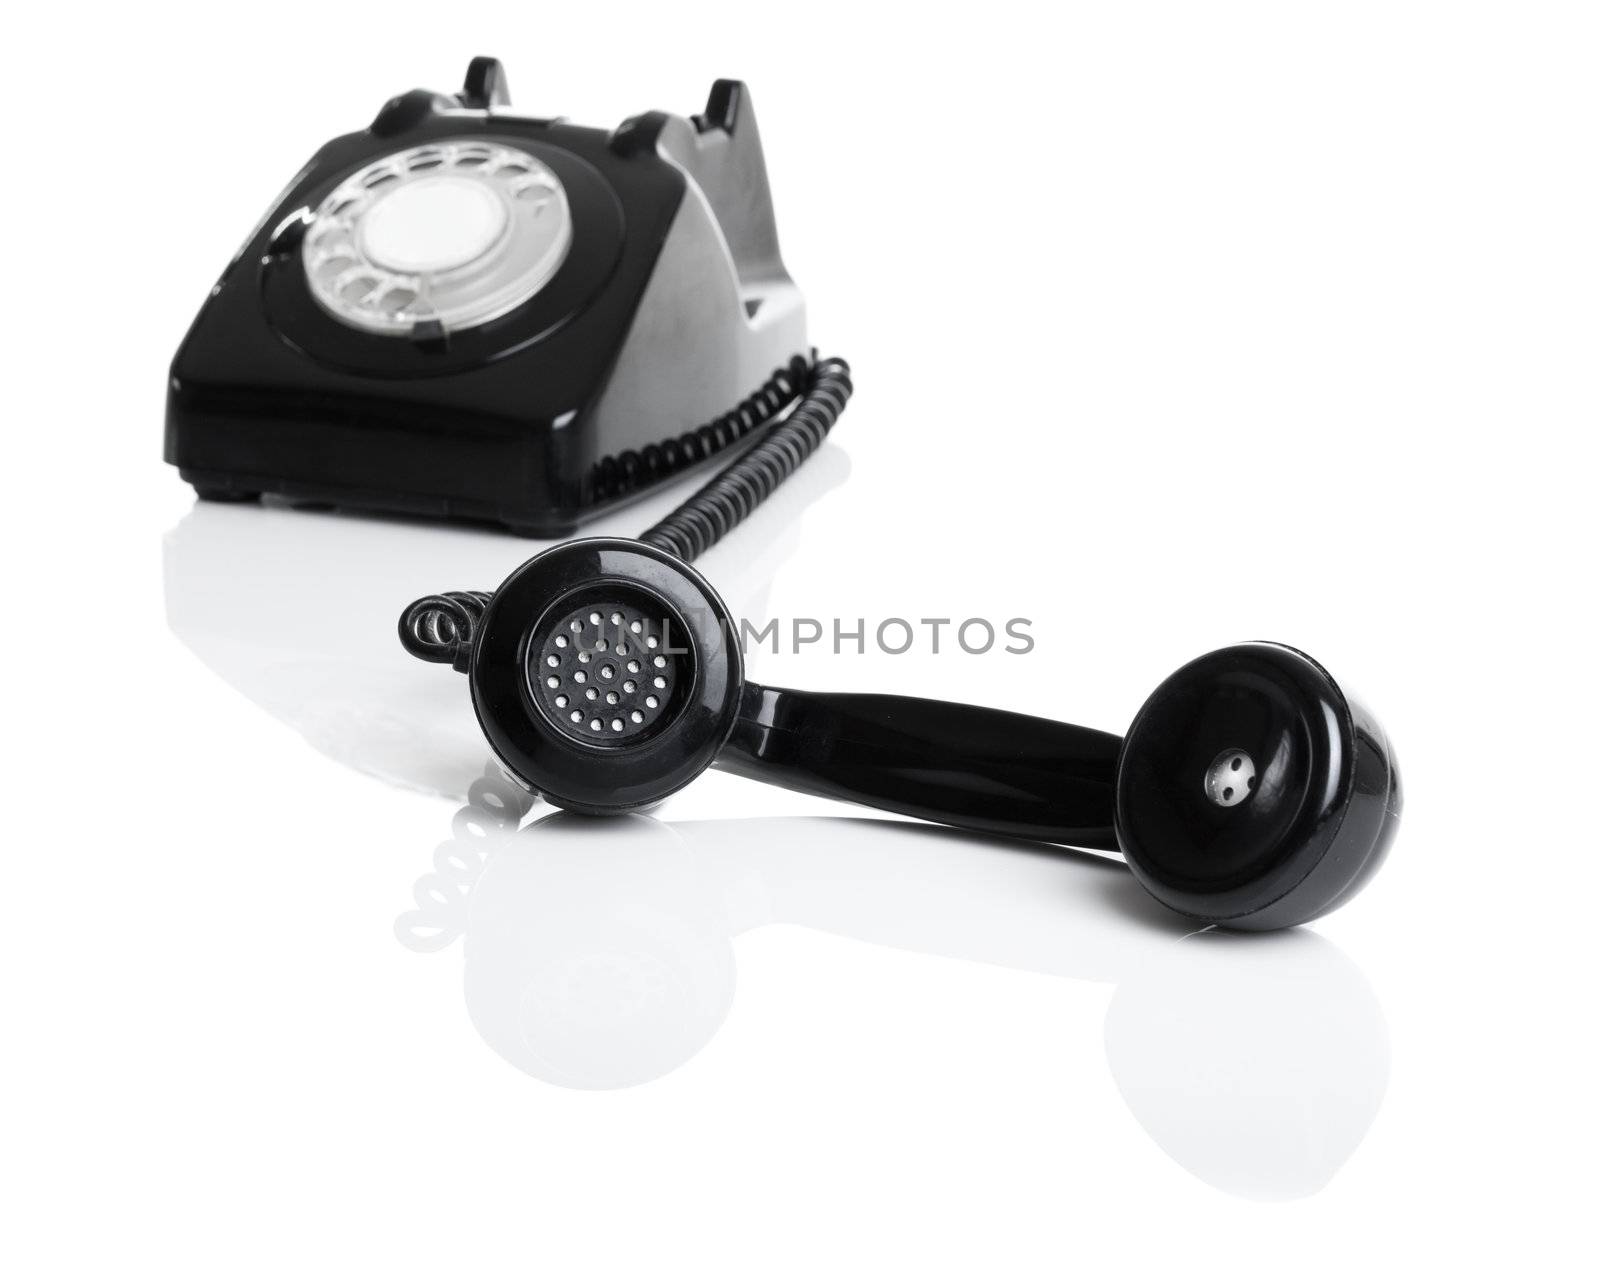 Nice vintage telephone perfectly isolated on white background, focus is on the handset